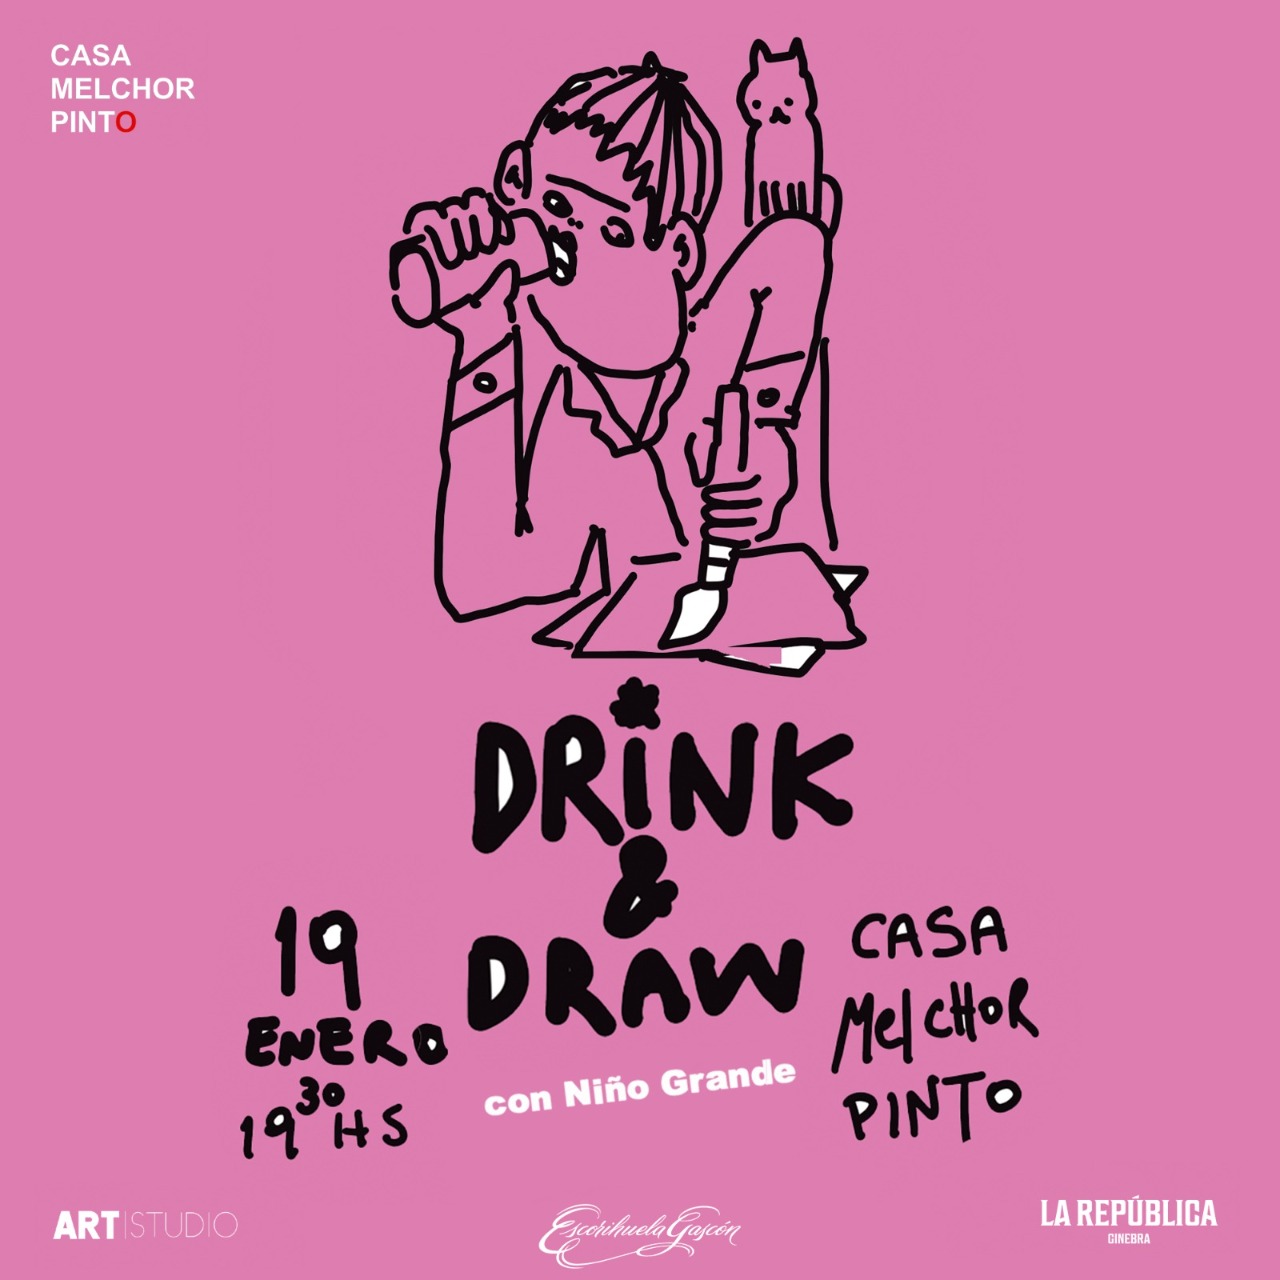 drink and draw 19 ene 2023